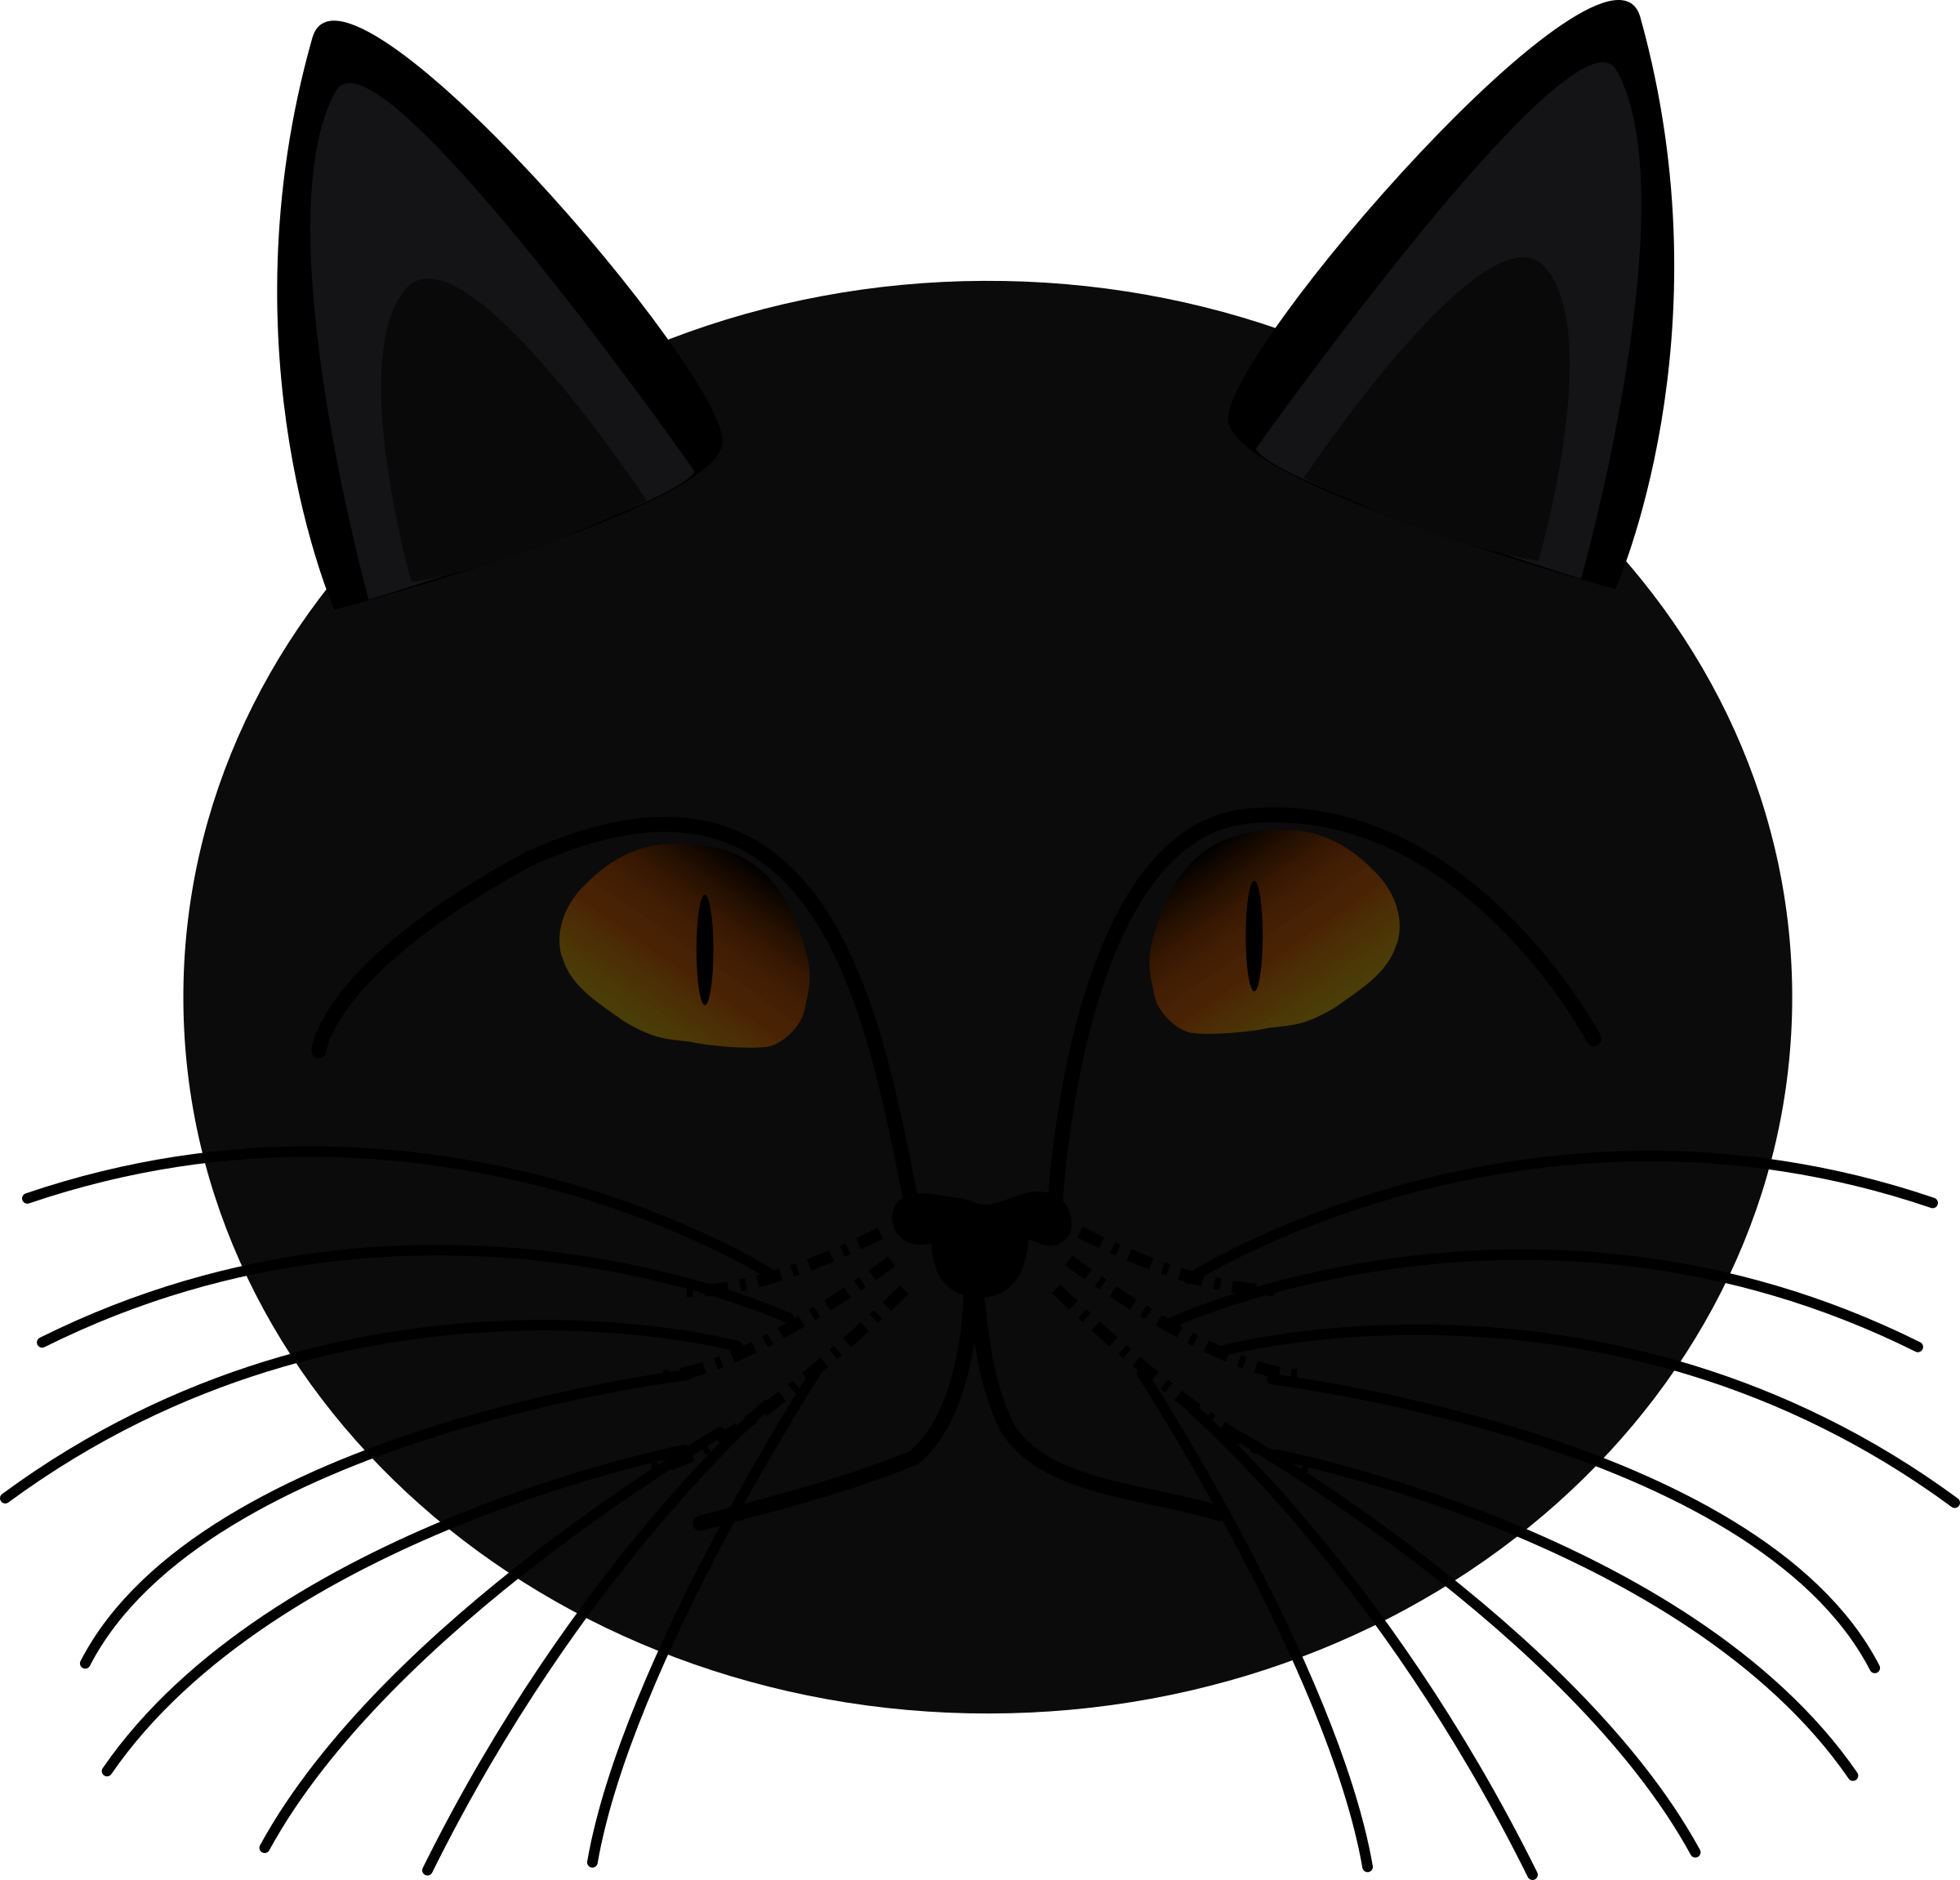  collection of black. Clipart cat mask